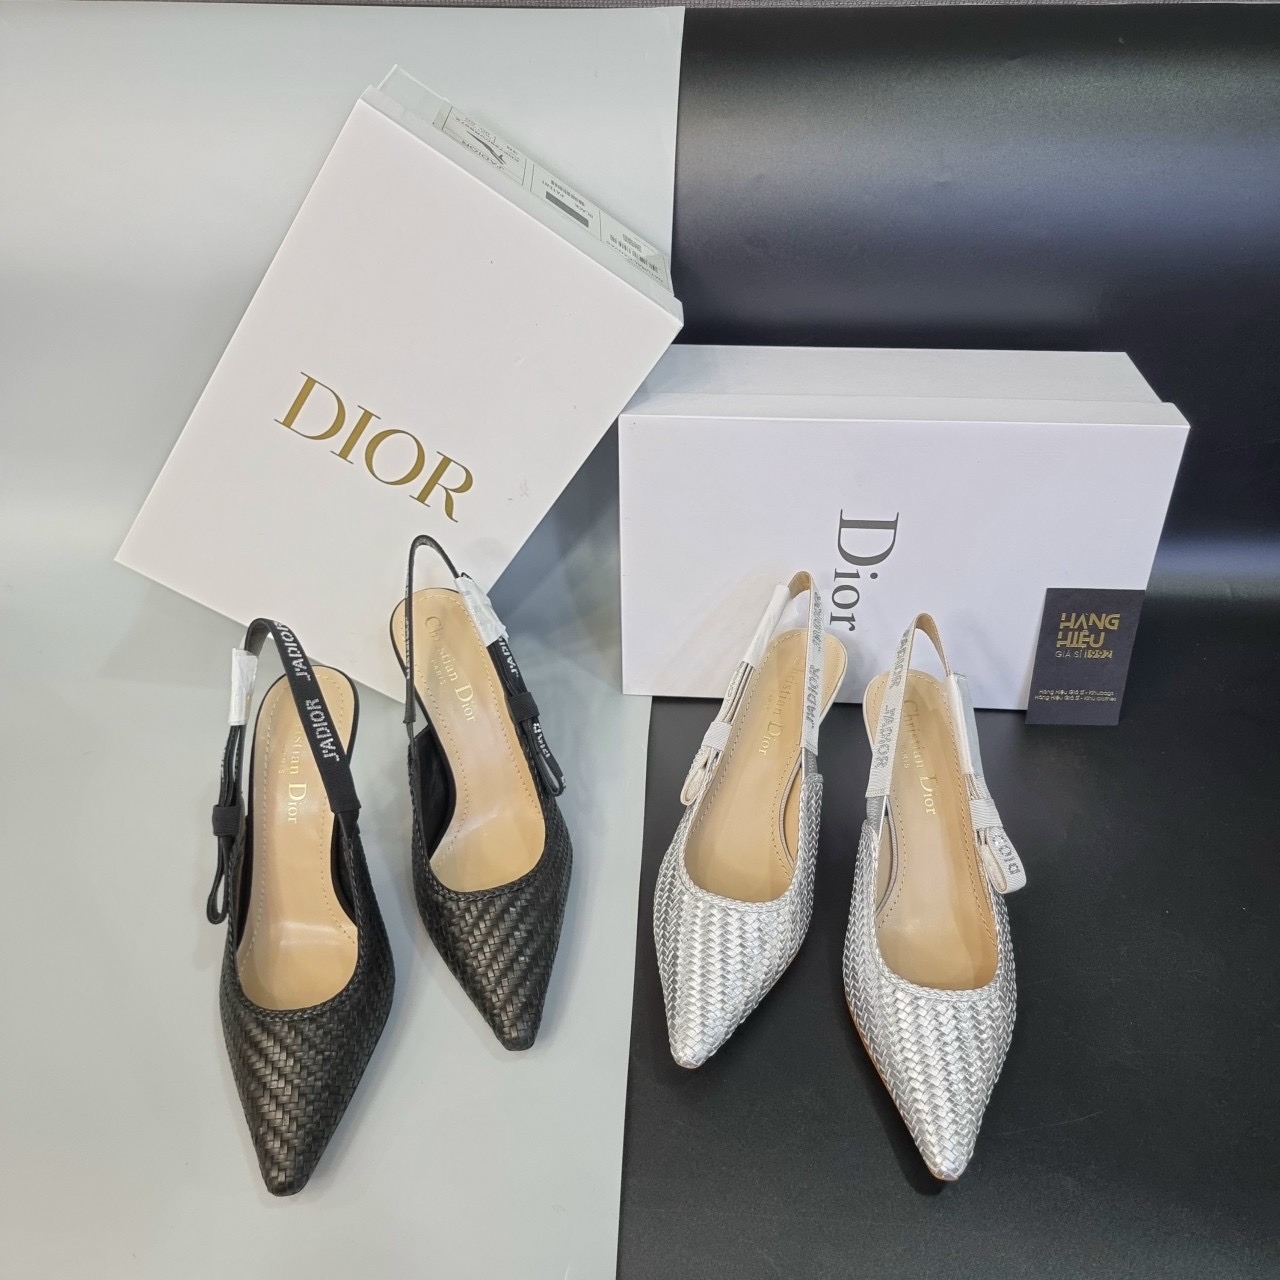 Vintage Christian Dior Shoes Green and Brown Pointed Toe Pumps  Modig